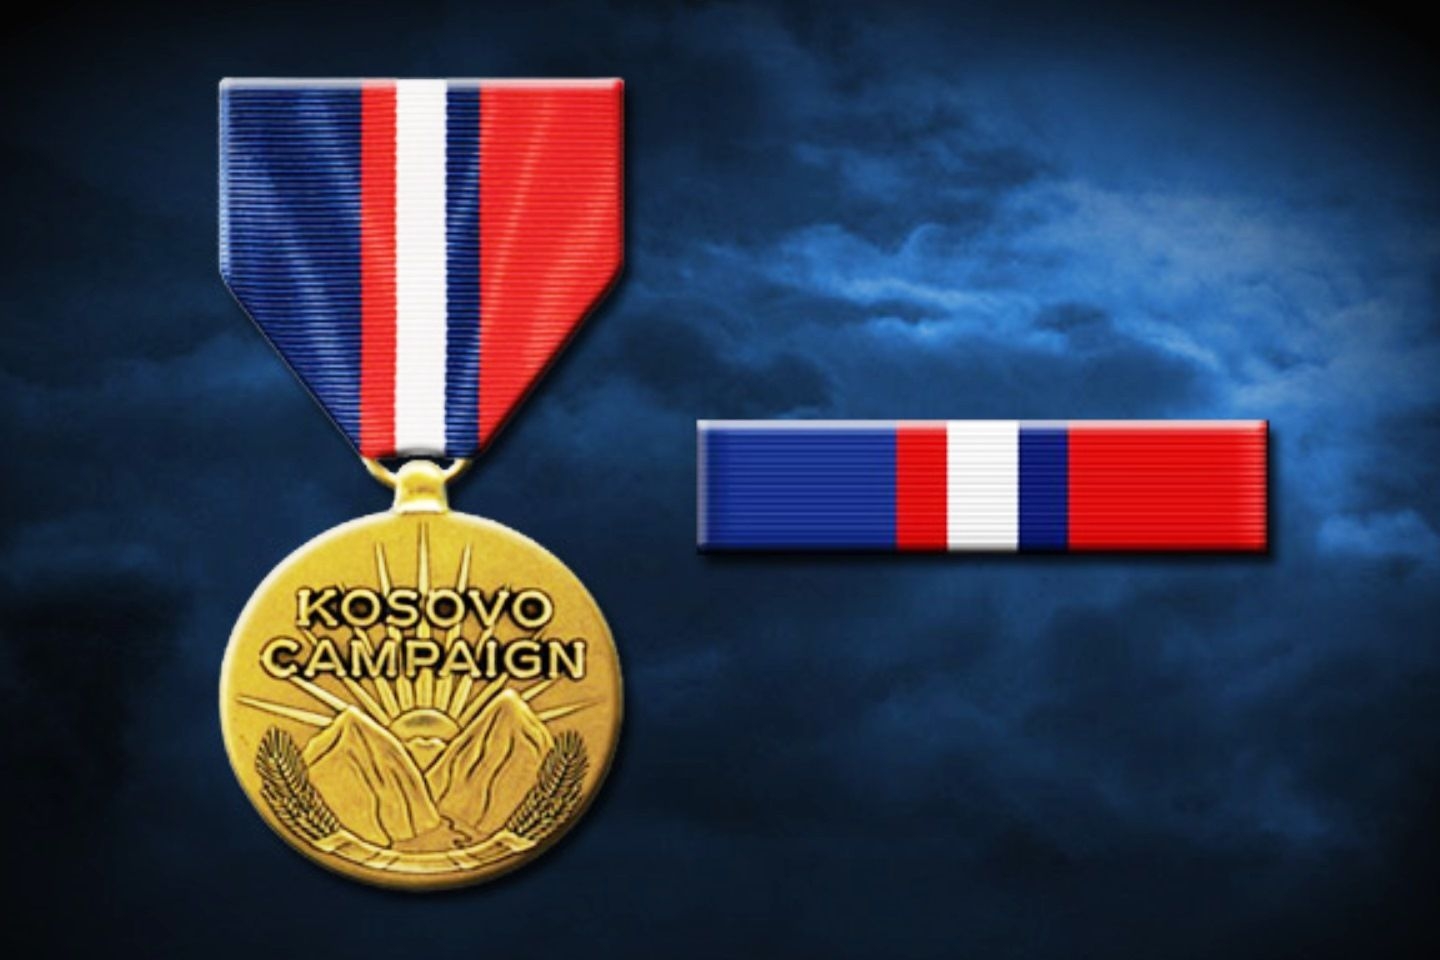 https://www.afpc.af.mil/About/Fact-Sheets/Display/Article/421864/medal-of-honor/